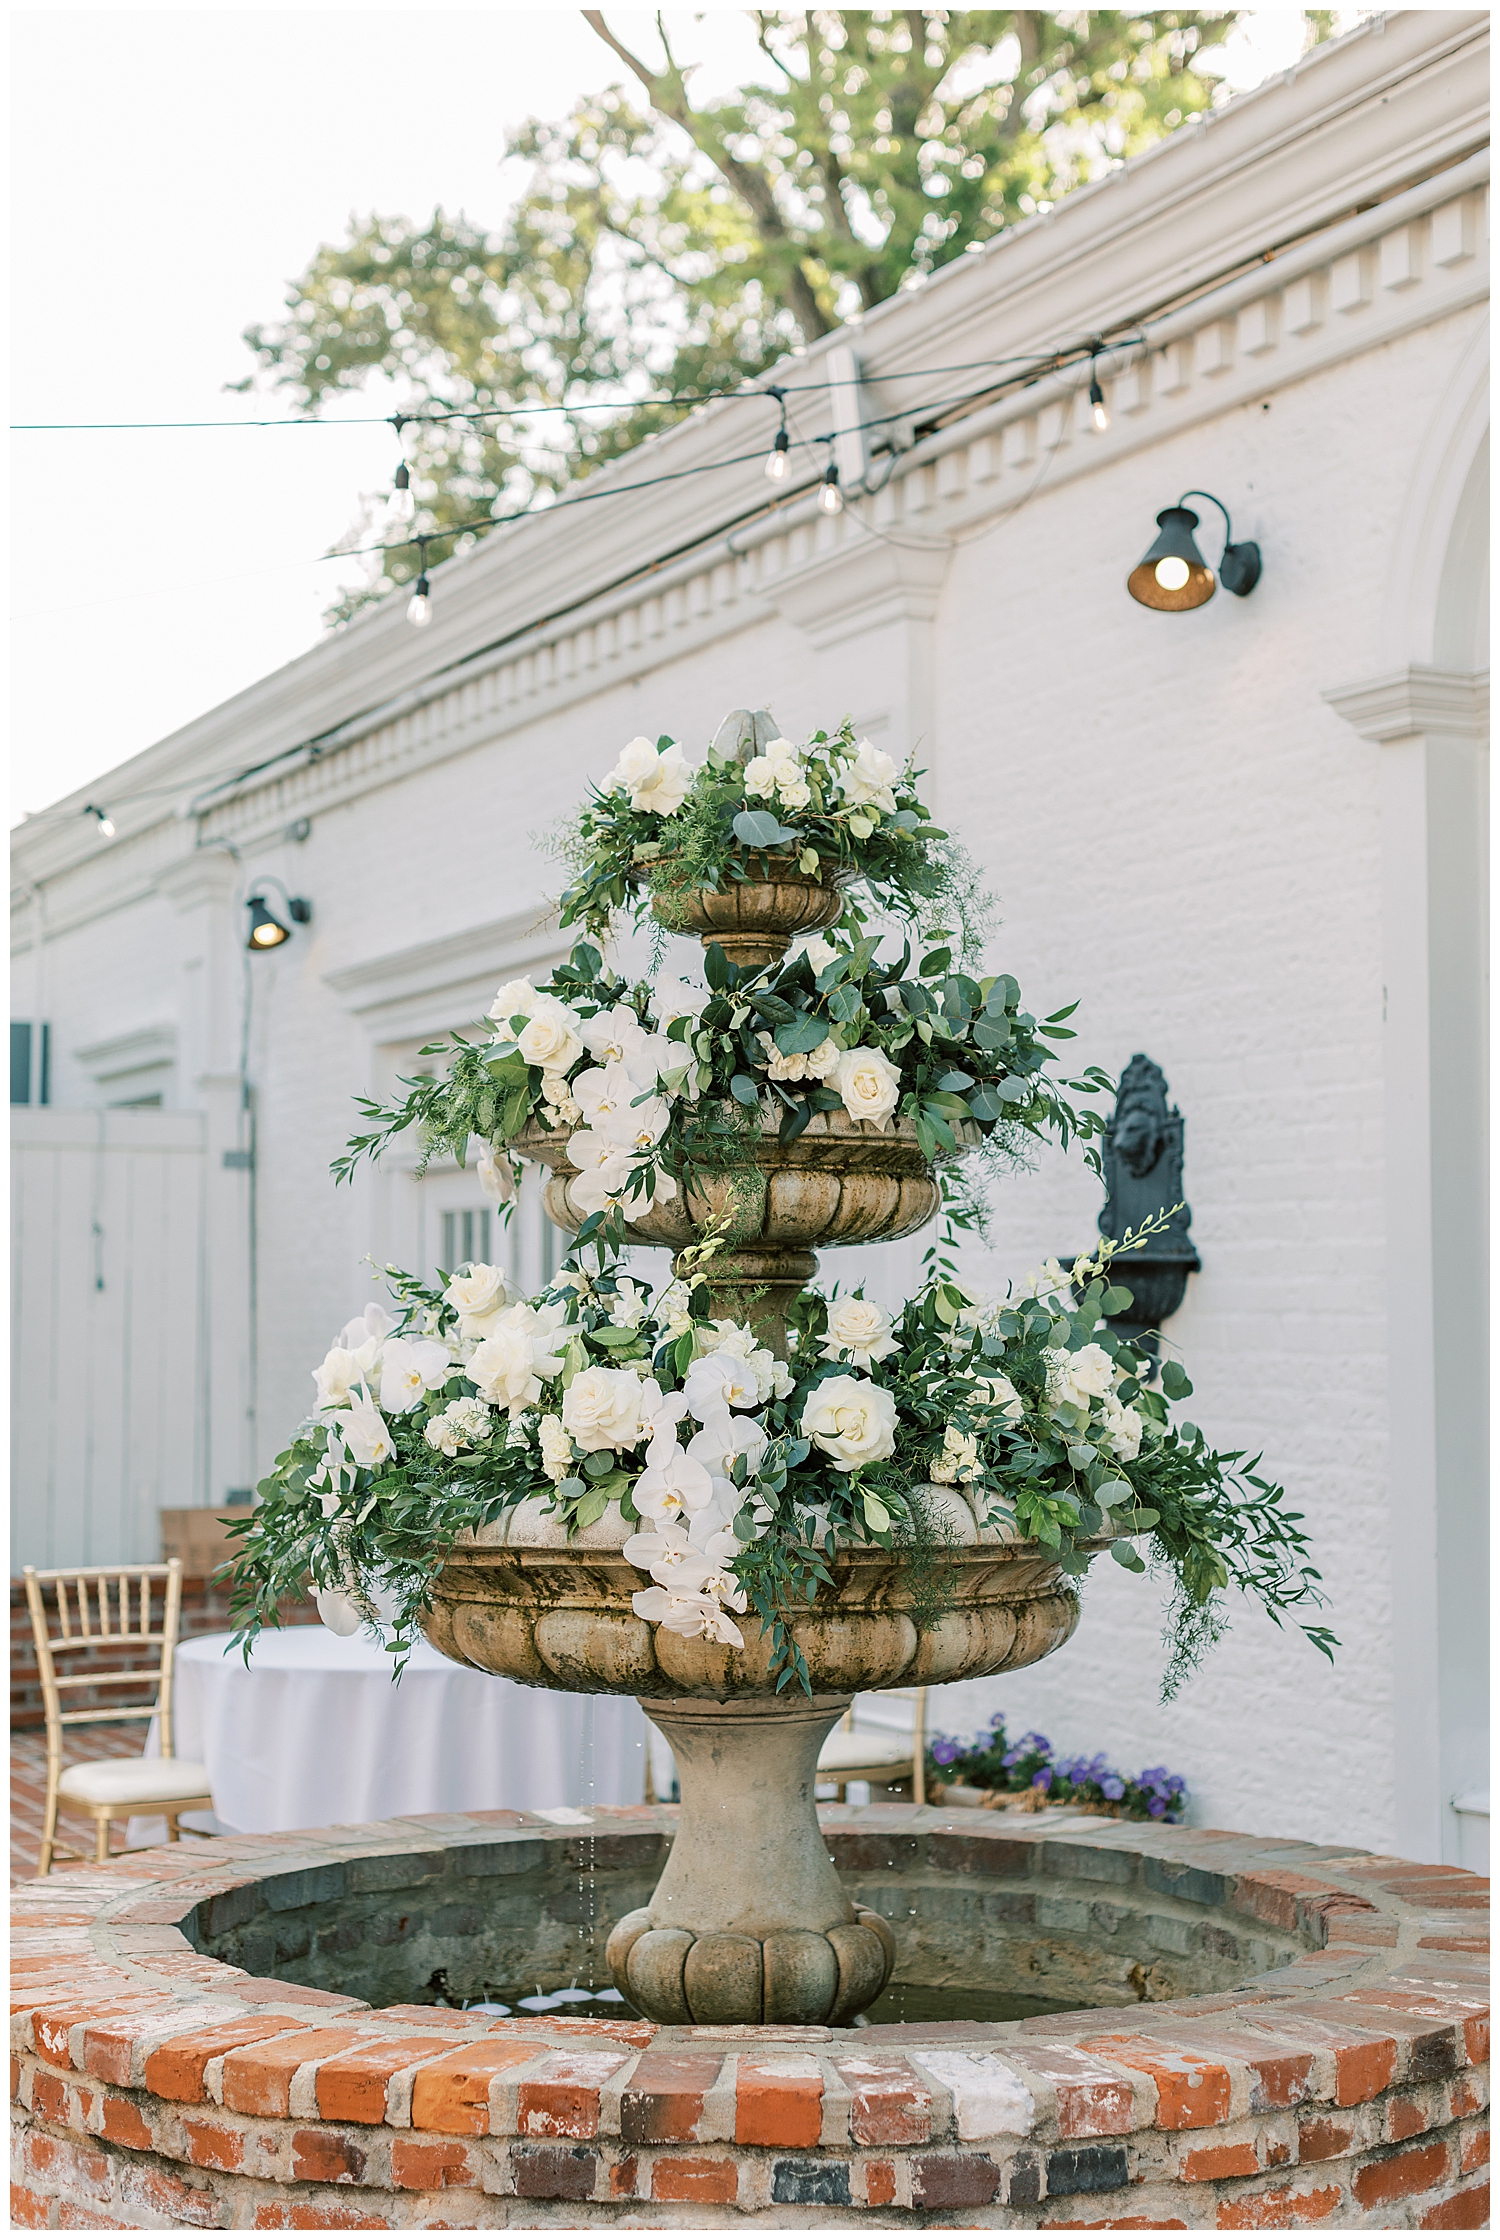 The Floral Cottage Florist designed this beautiful white and green floral fountain.